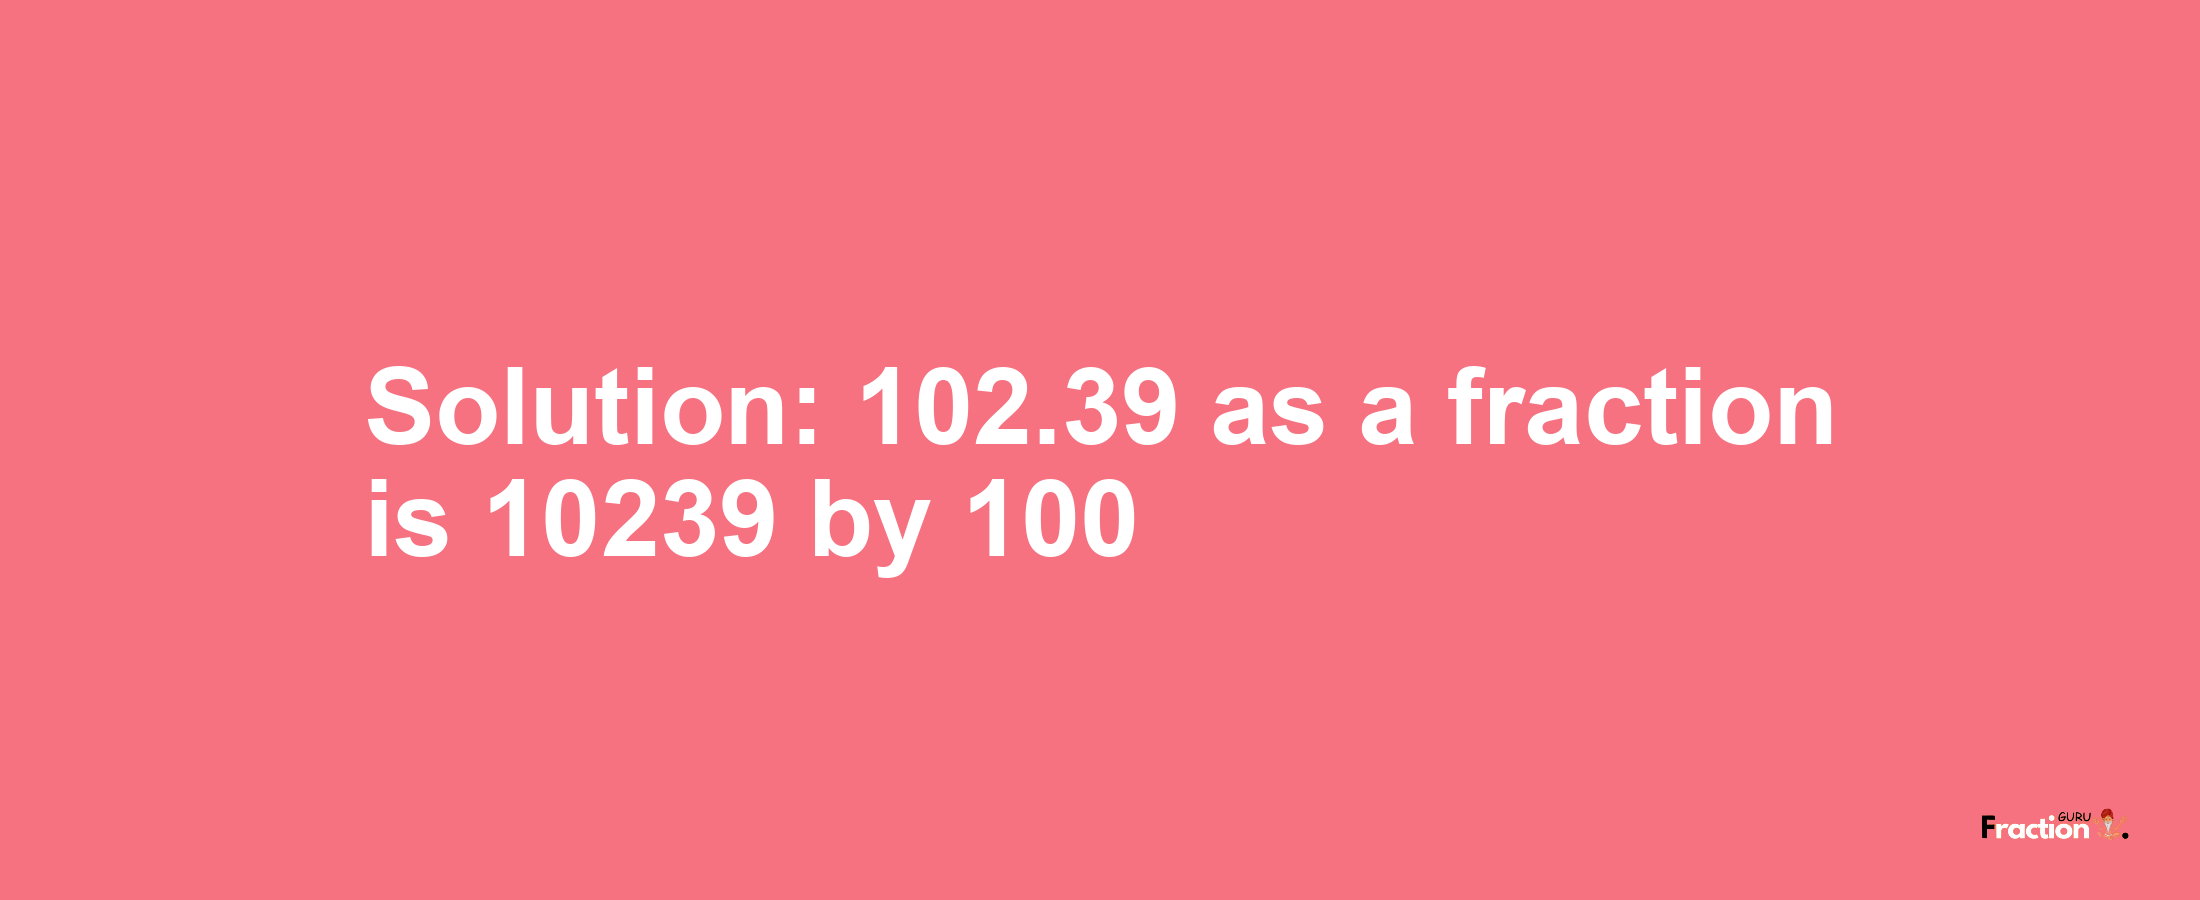 Solution:102.39 as a fraction is 10239/100